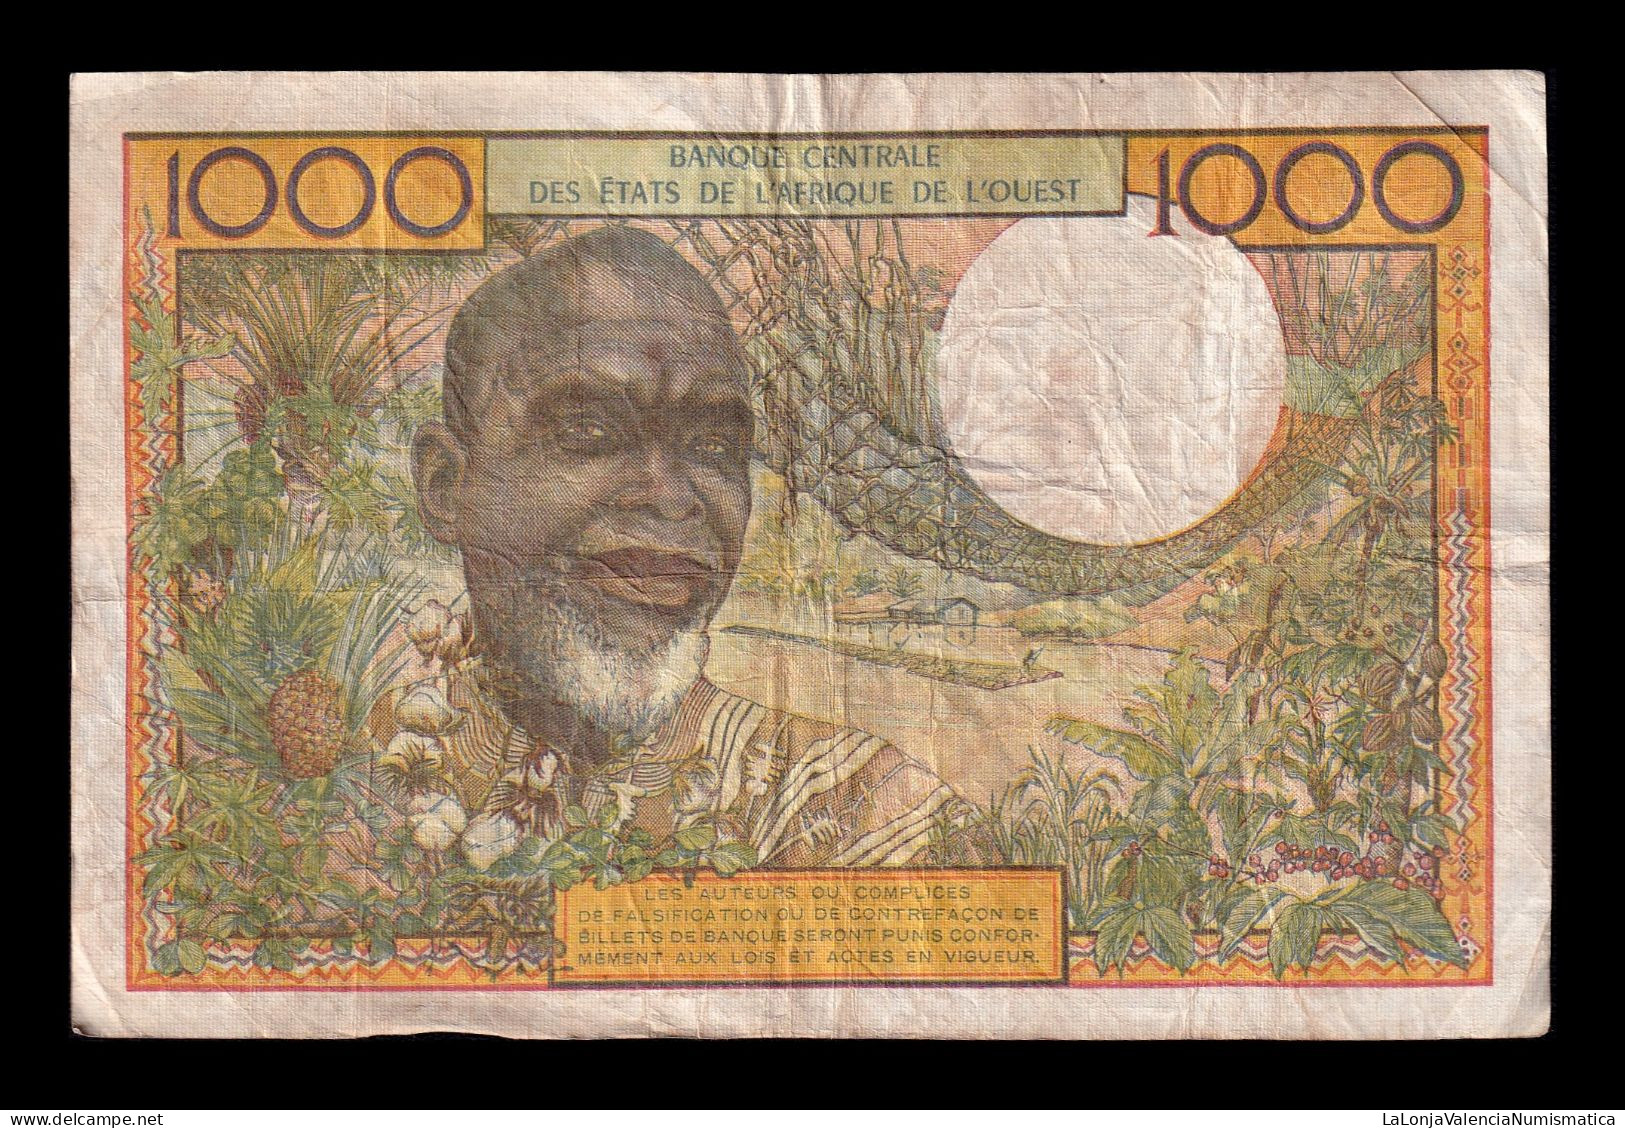 West African St. Senegal 1000 Francs ND (1959-1965) Pick 703Kn Bc/Mbc F/Vf - West African States